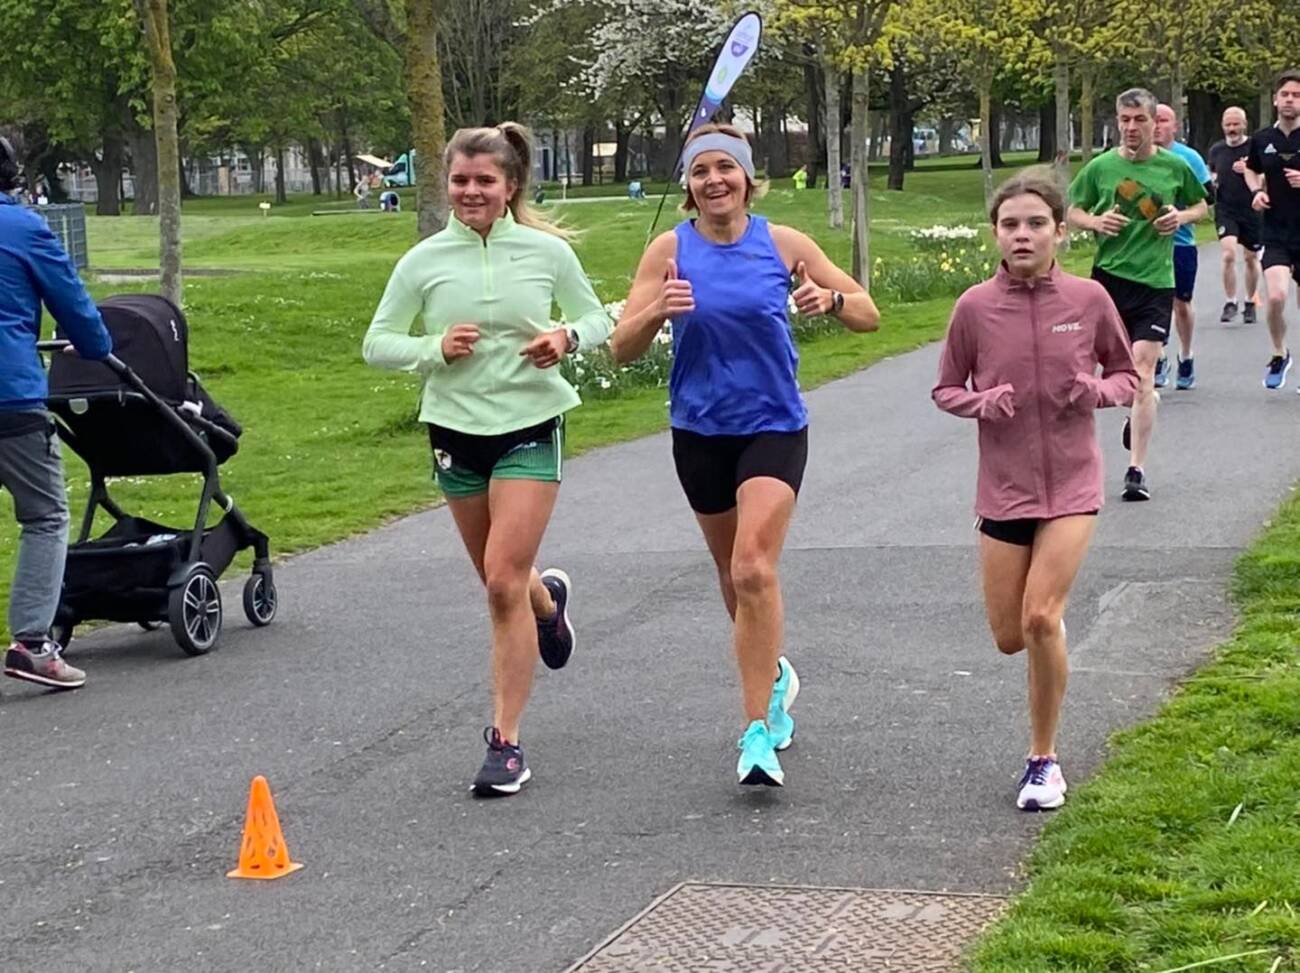 The Farley ladies, Oilibhia, Catherine, and AlannaRose, running together at the Fairview Parkrun 23-04-22